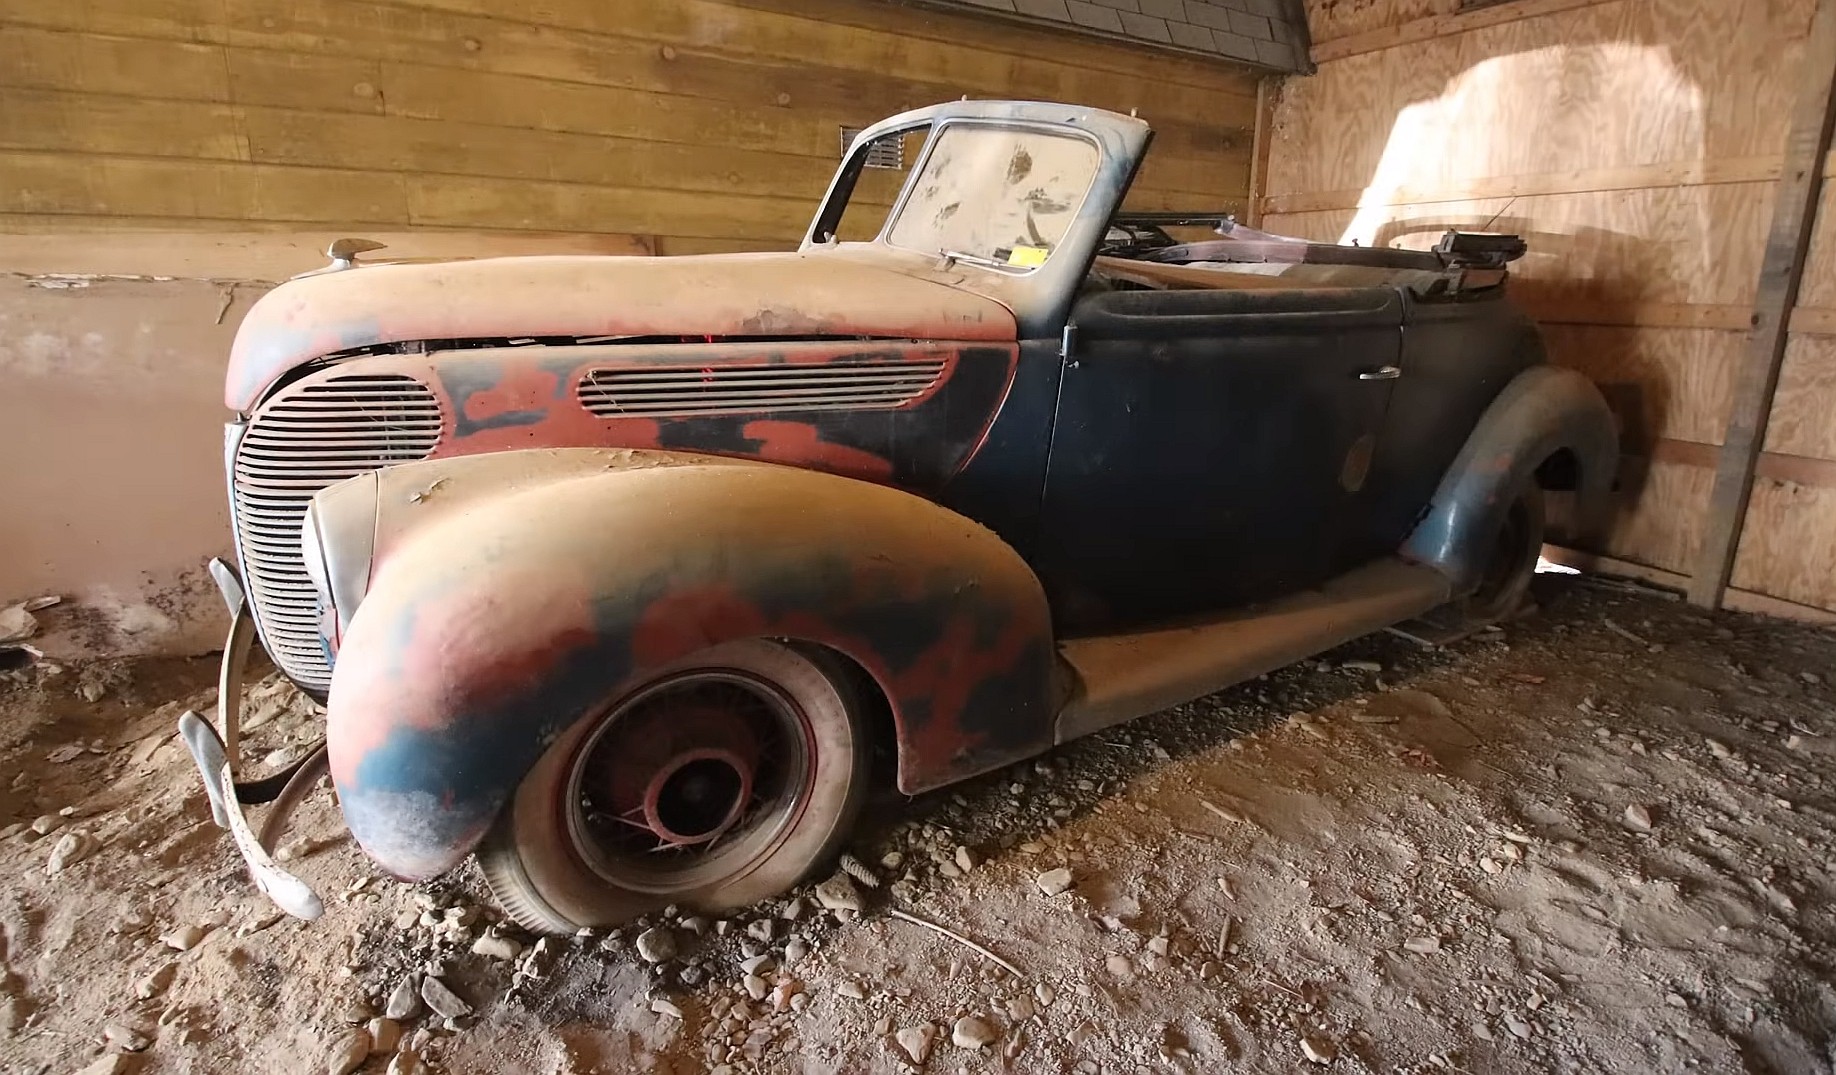 1938 Ford Convertible Is Unearthed – Now What?